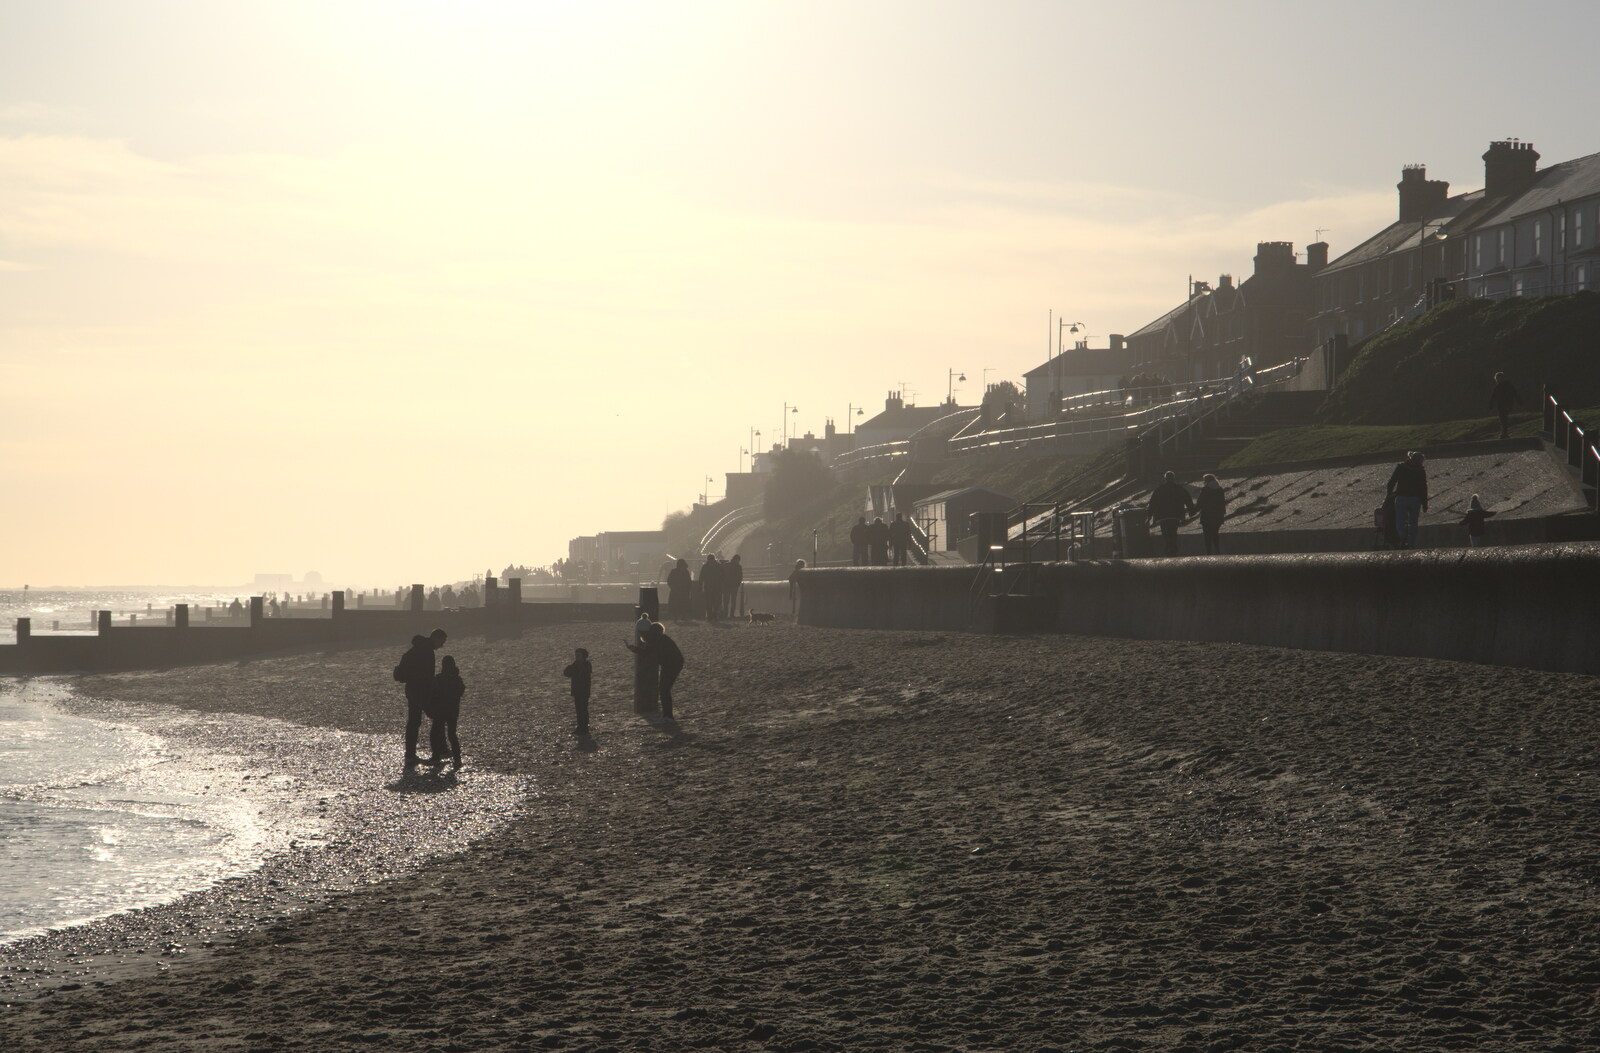 Looking down the hazy beach from A Return to the Beach, Southwold, Suffolk - 20th December 2020